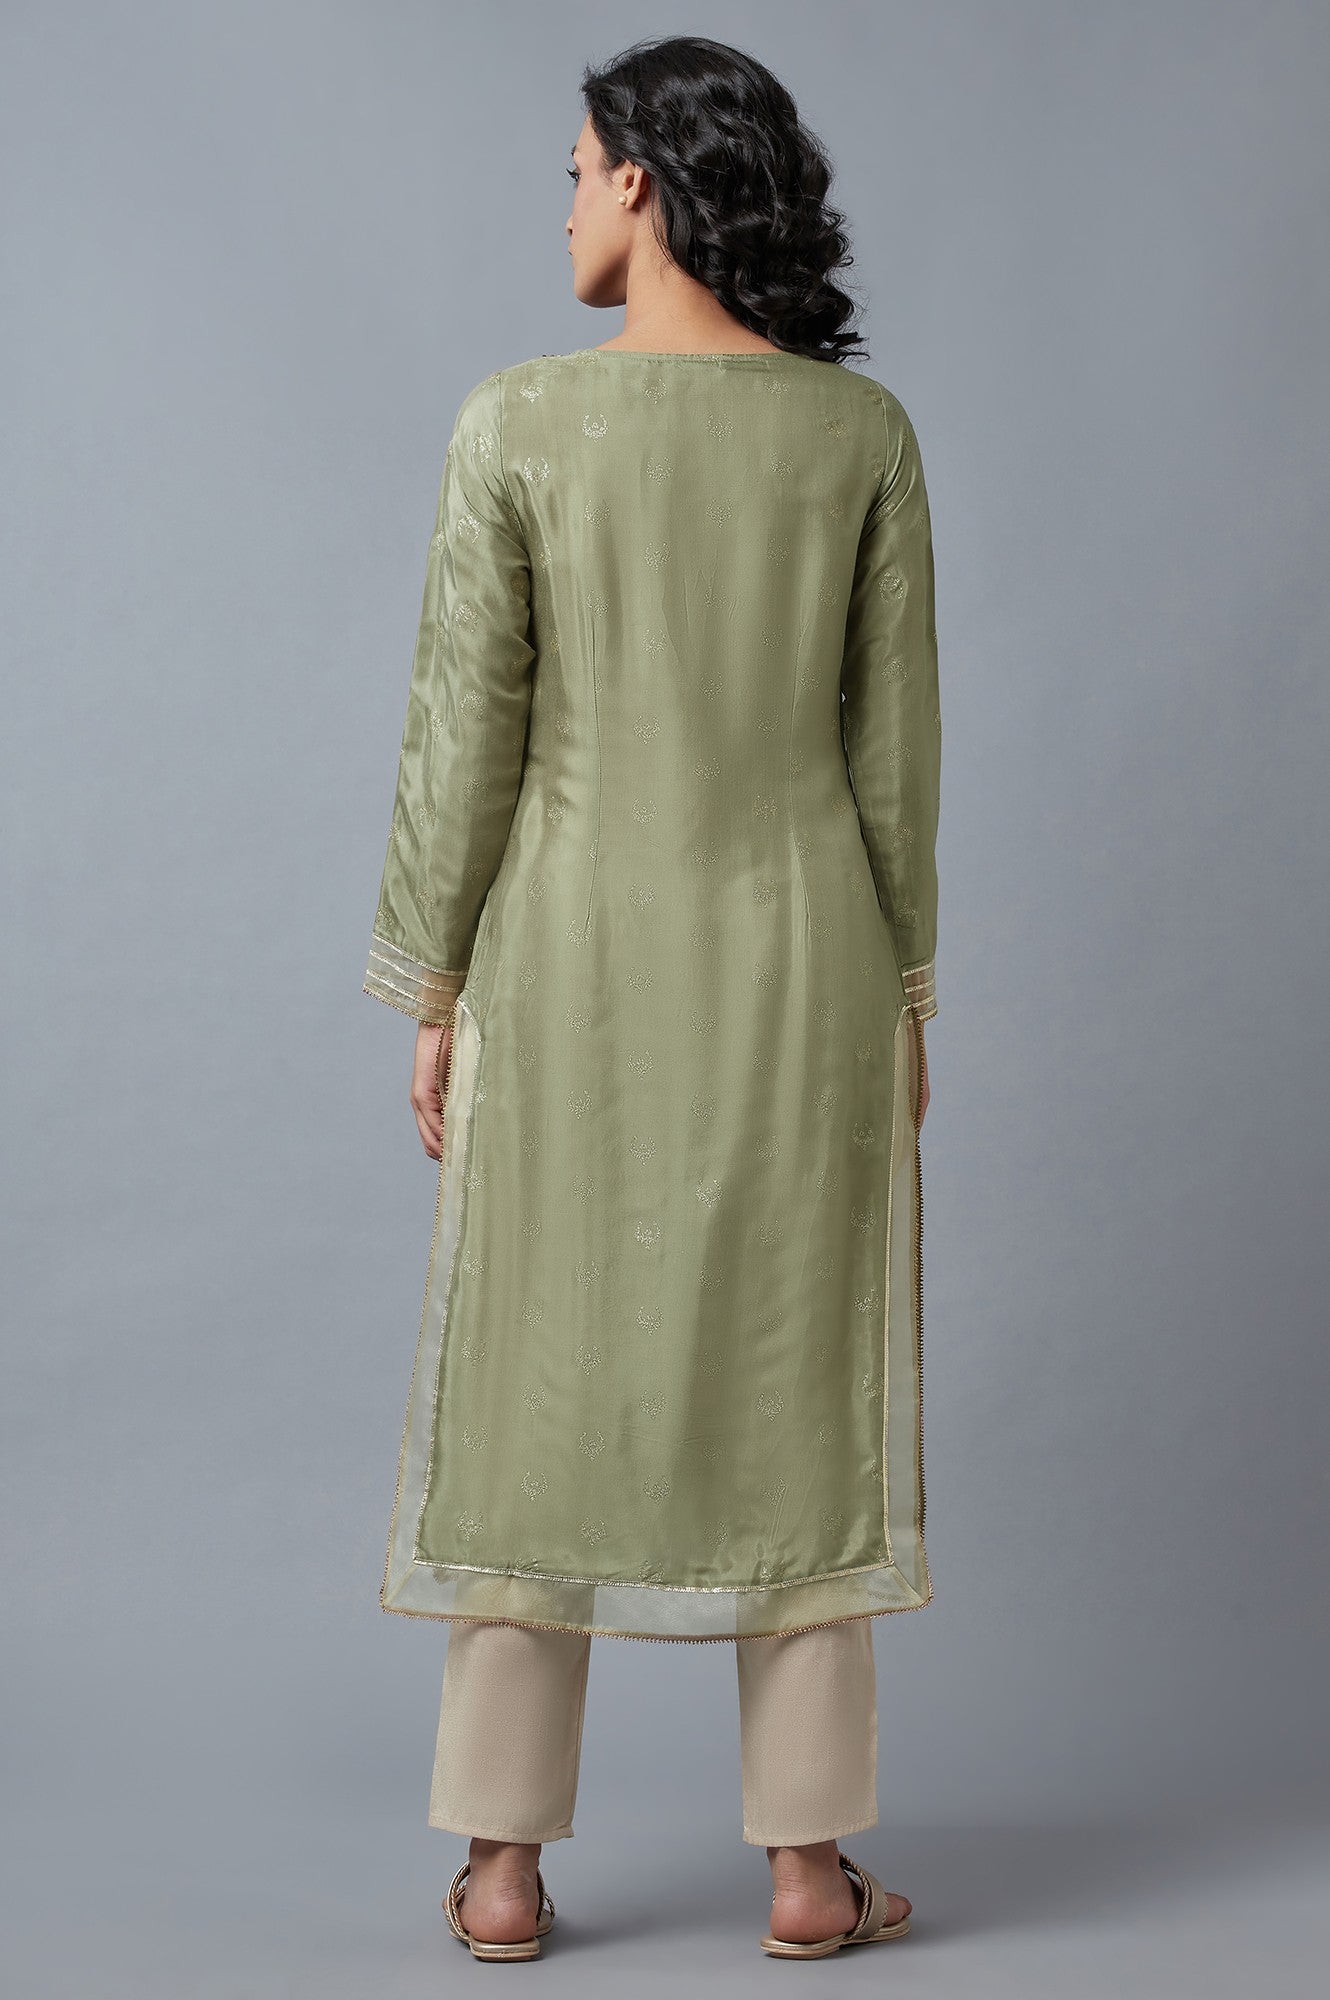 Olive Green Glitter Print Round Neck kurta With Embroidery